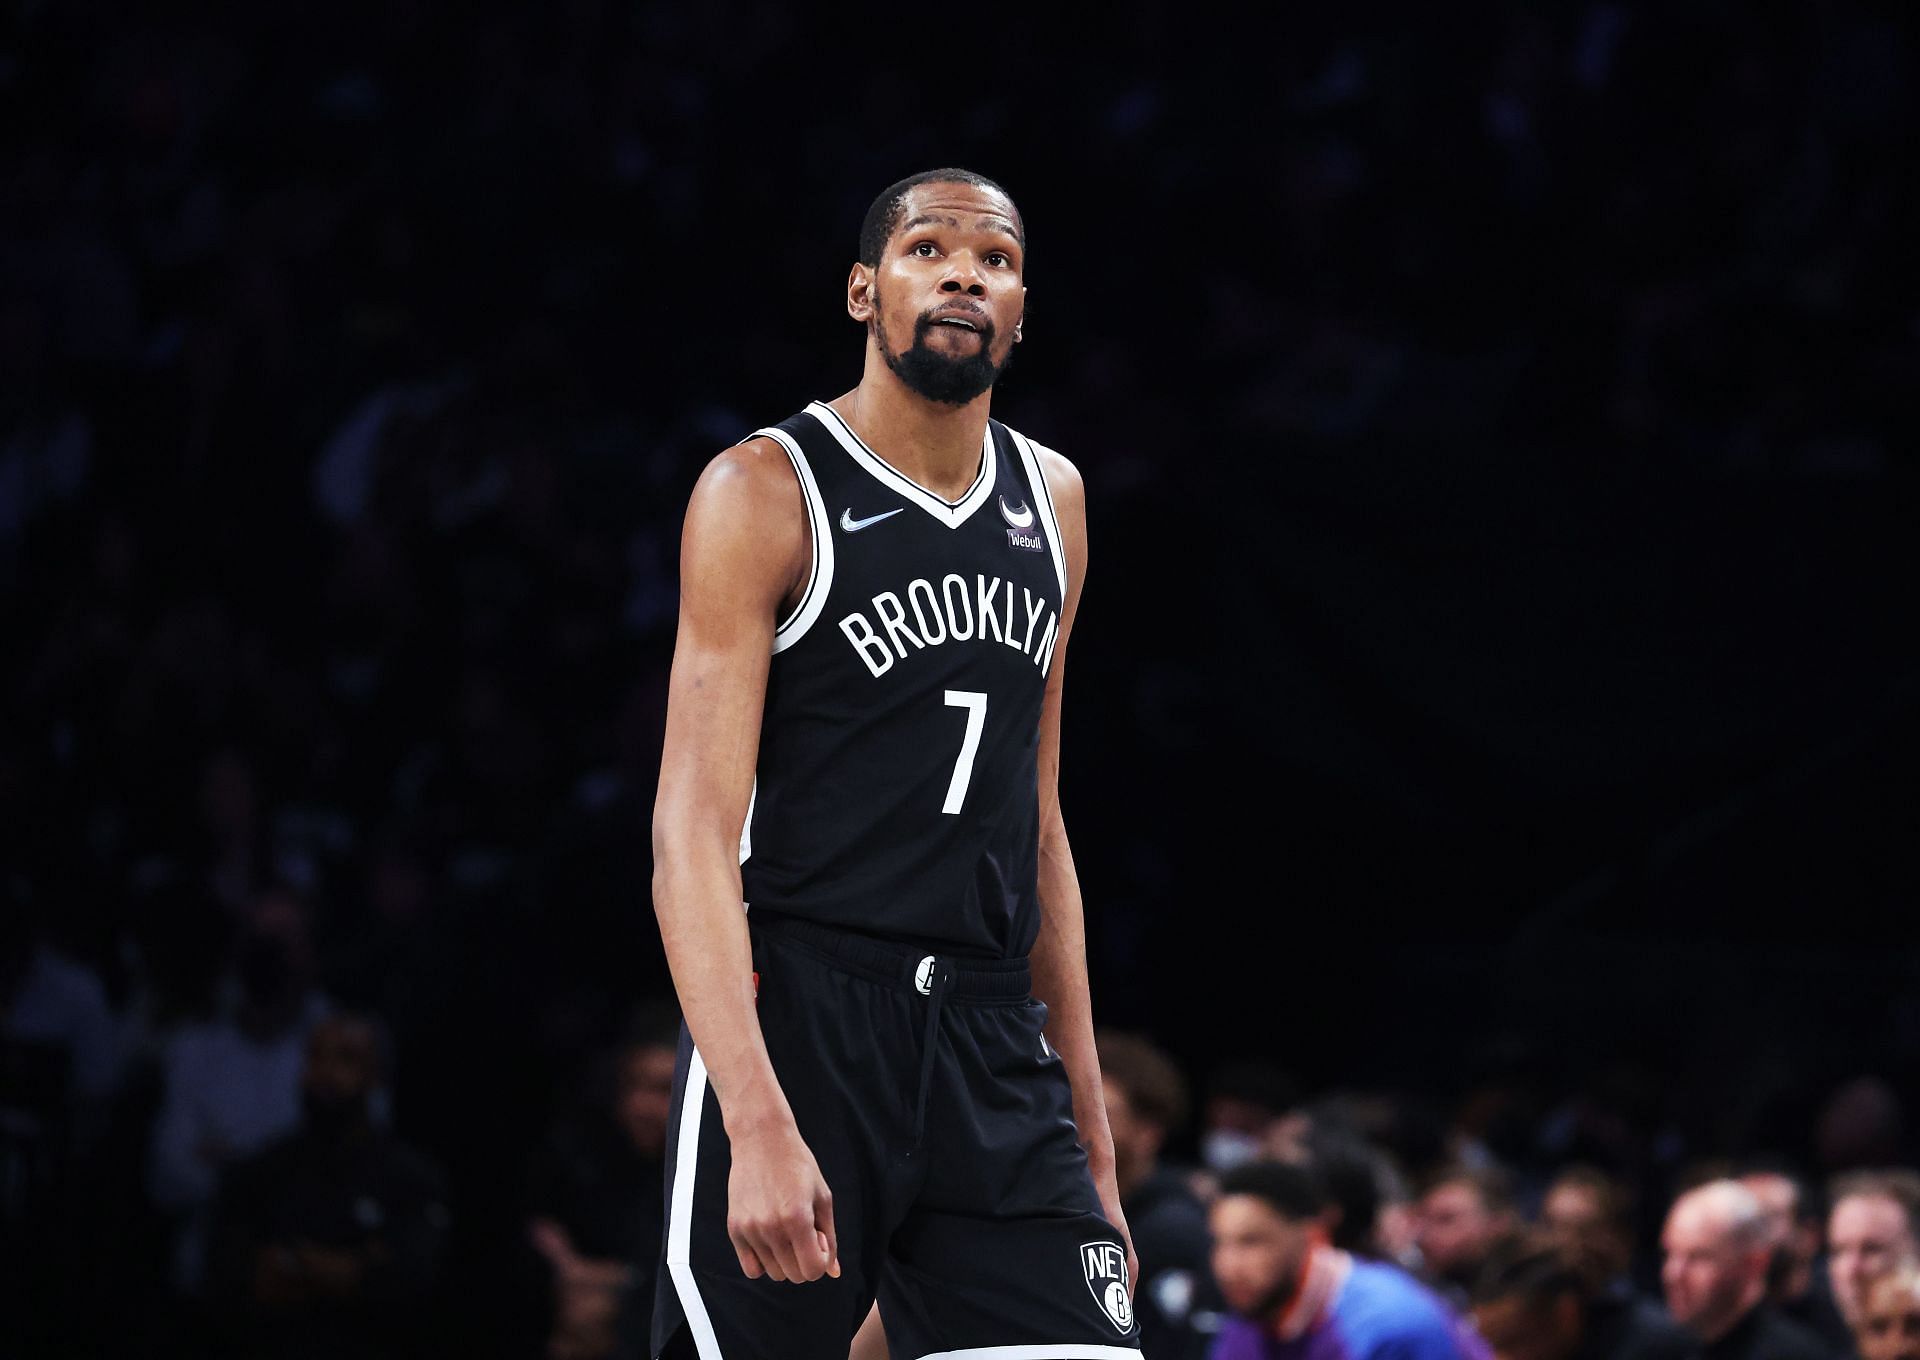 Kevin Durant of the Brooklyn Nets looks on against the Boston Celtics during Game 3 of the Eastern Conference first round playoffs on April 23 in New York City.